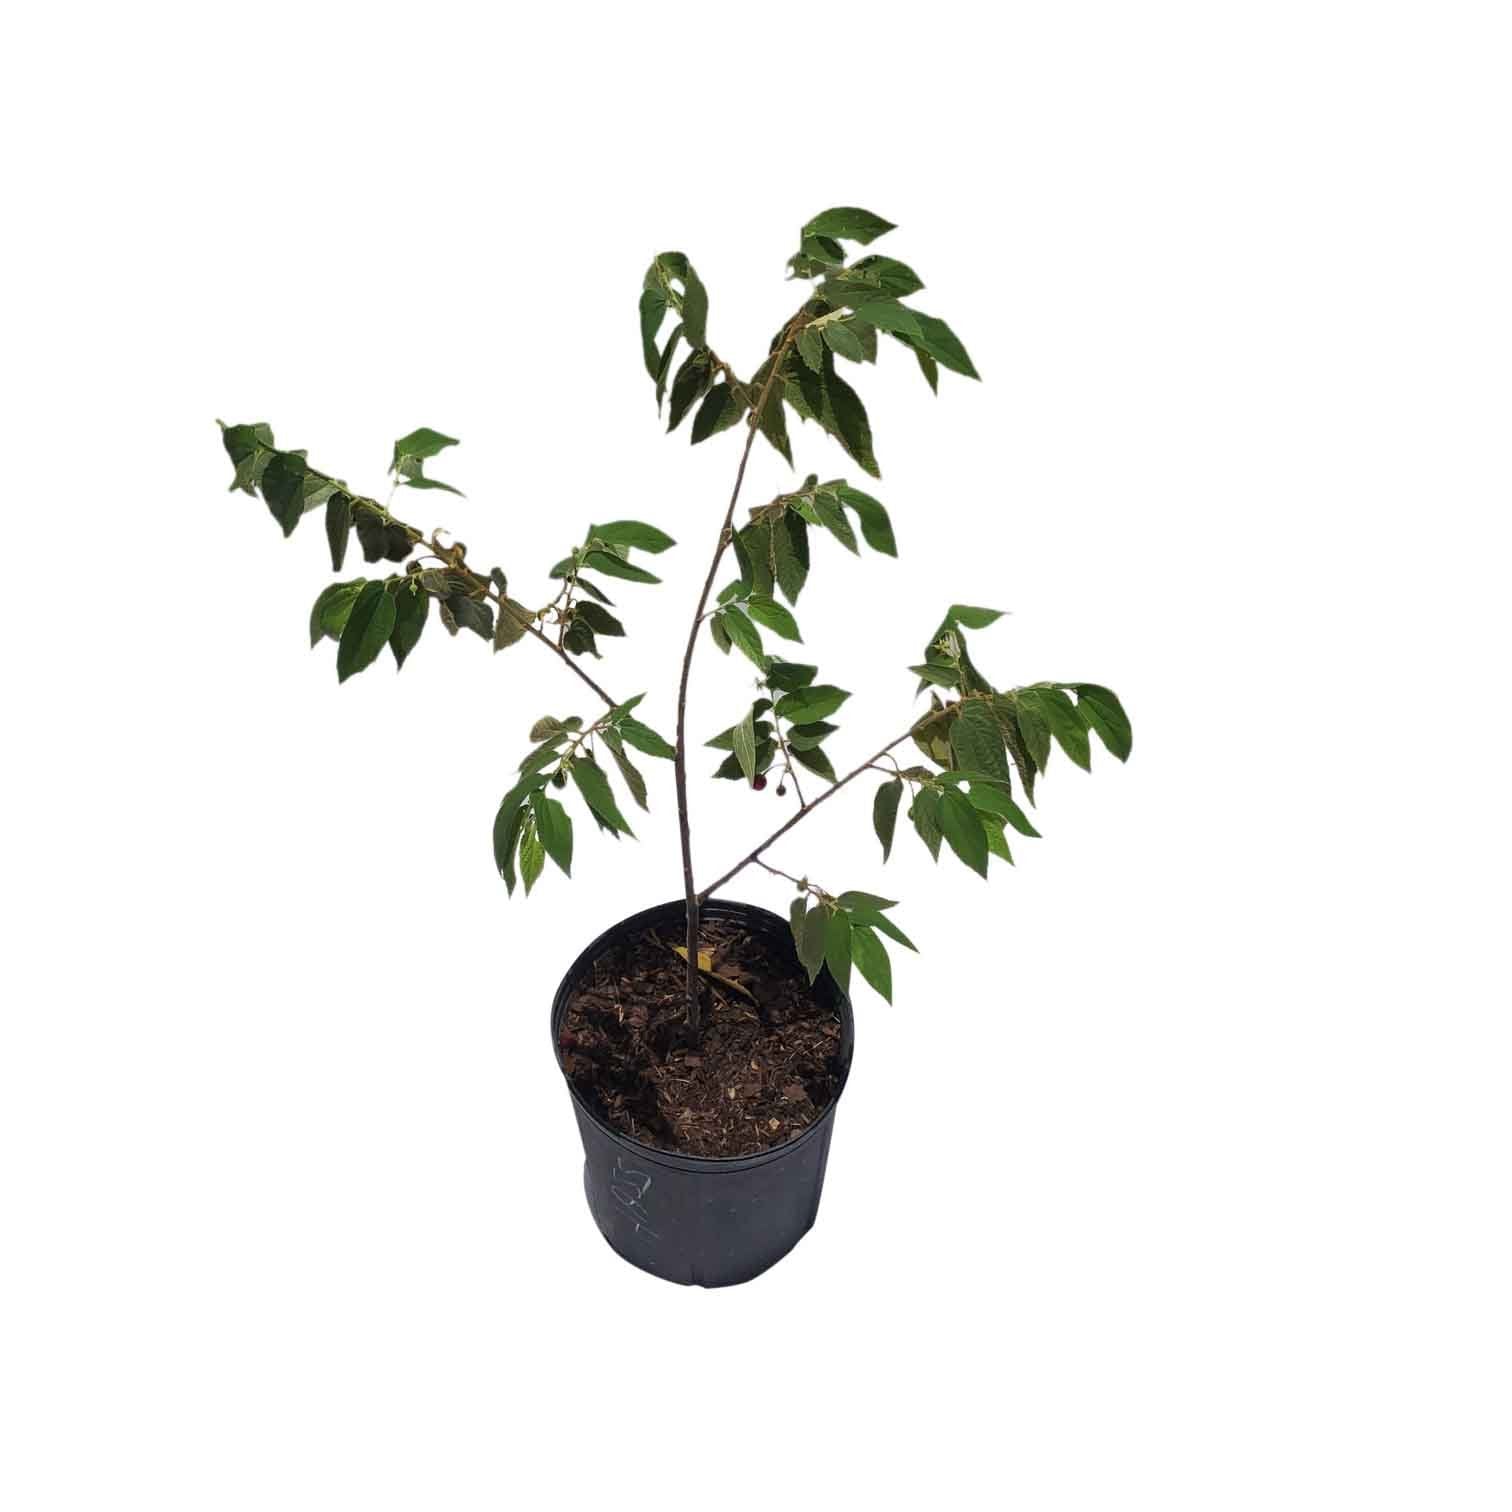 Capulin Cherry Capuli Tropic Cherry Tree, 3 Gal Container from Florida